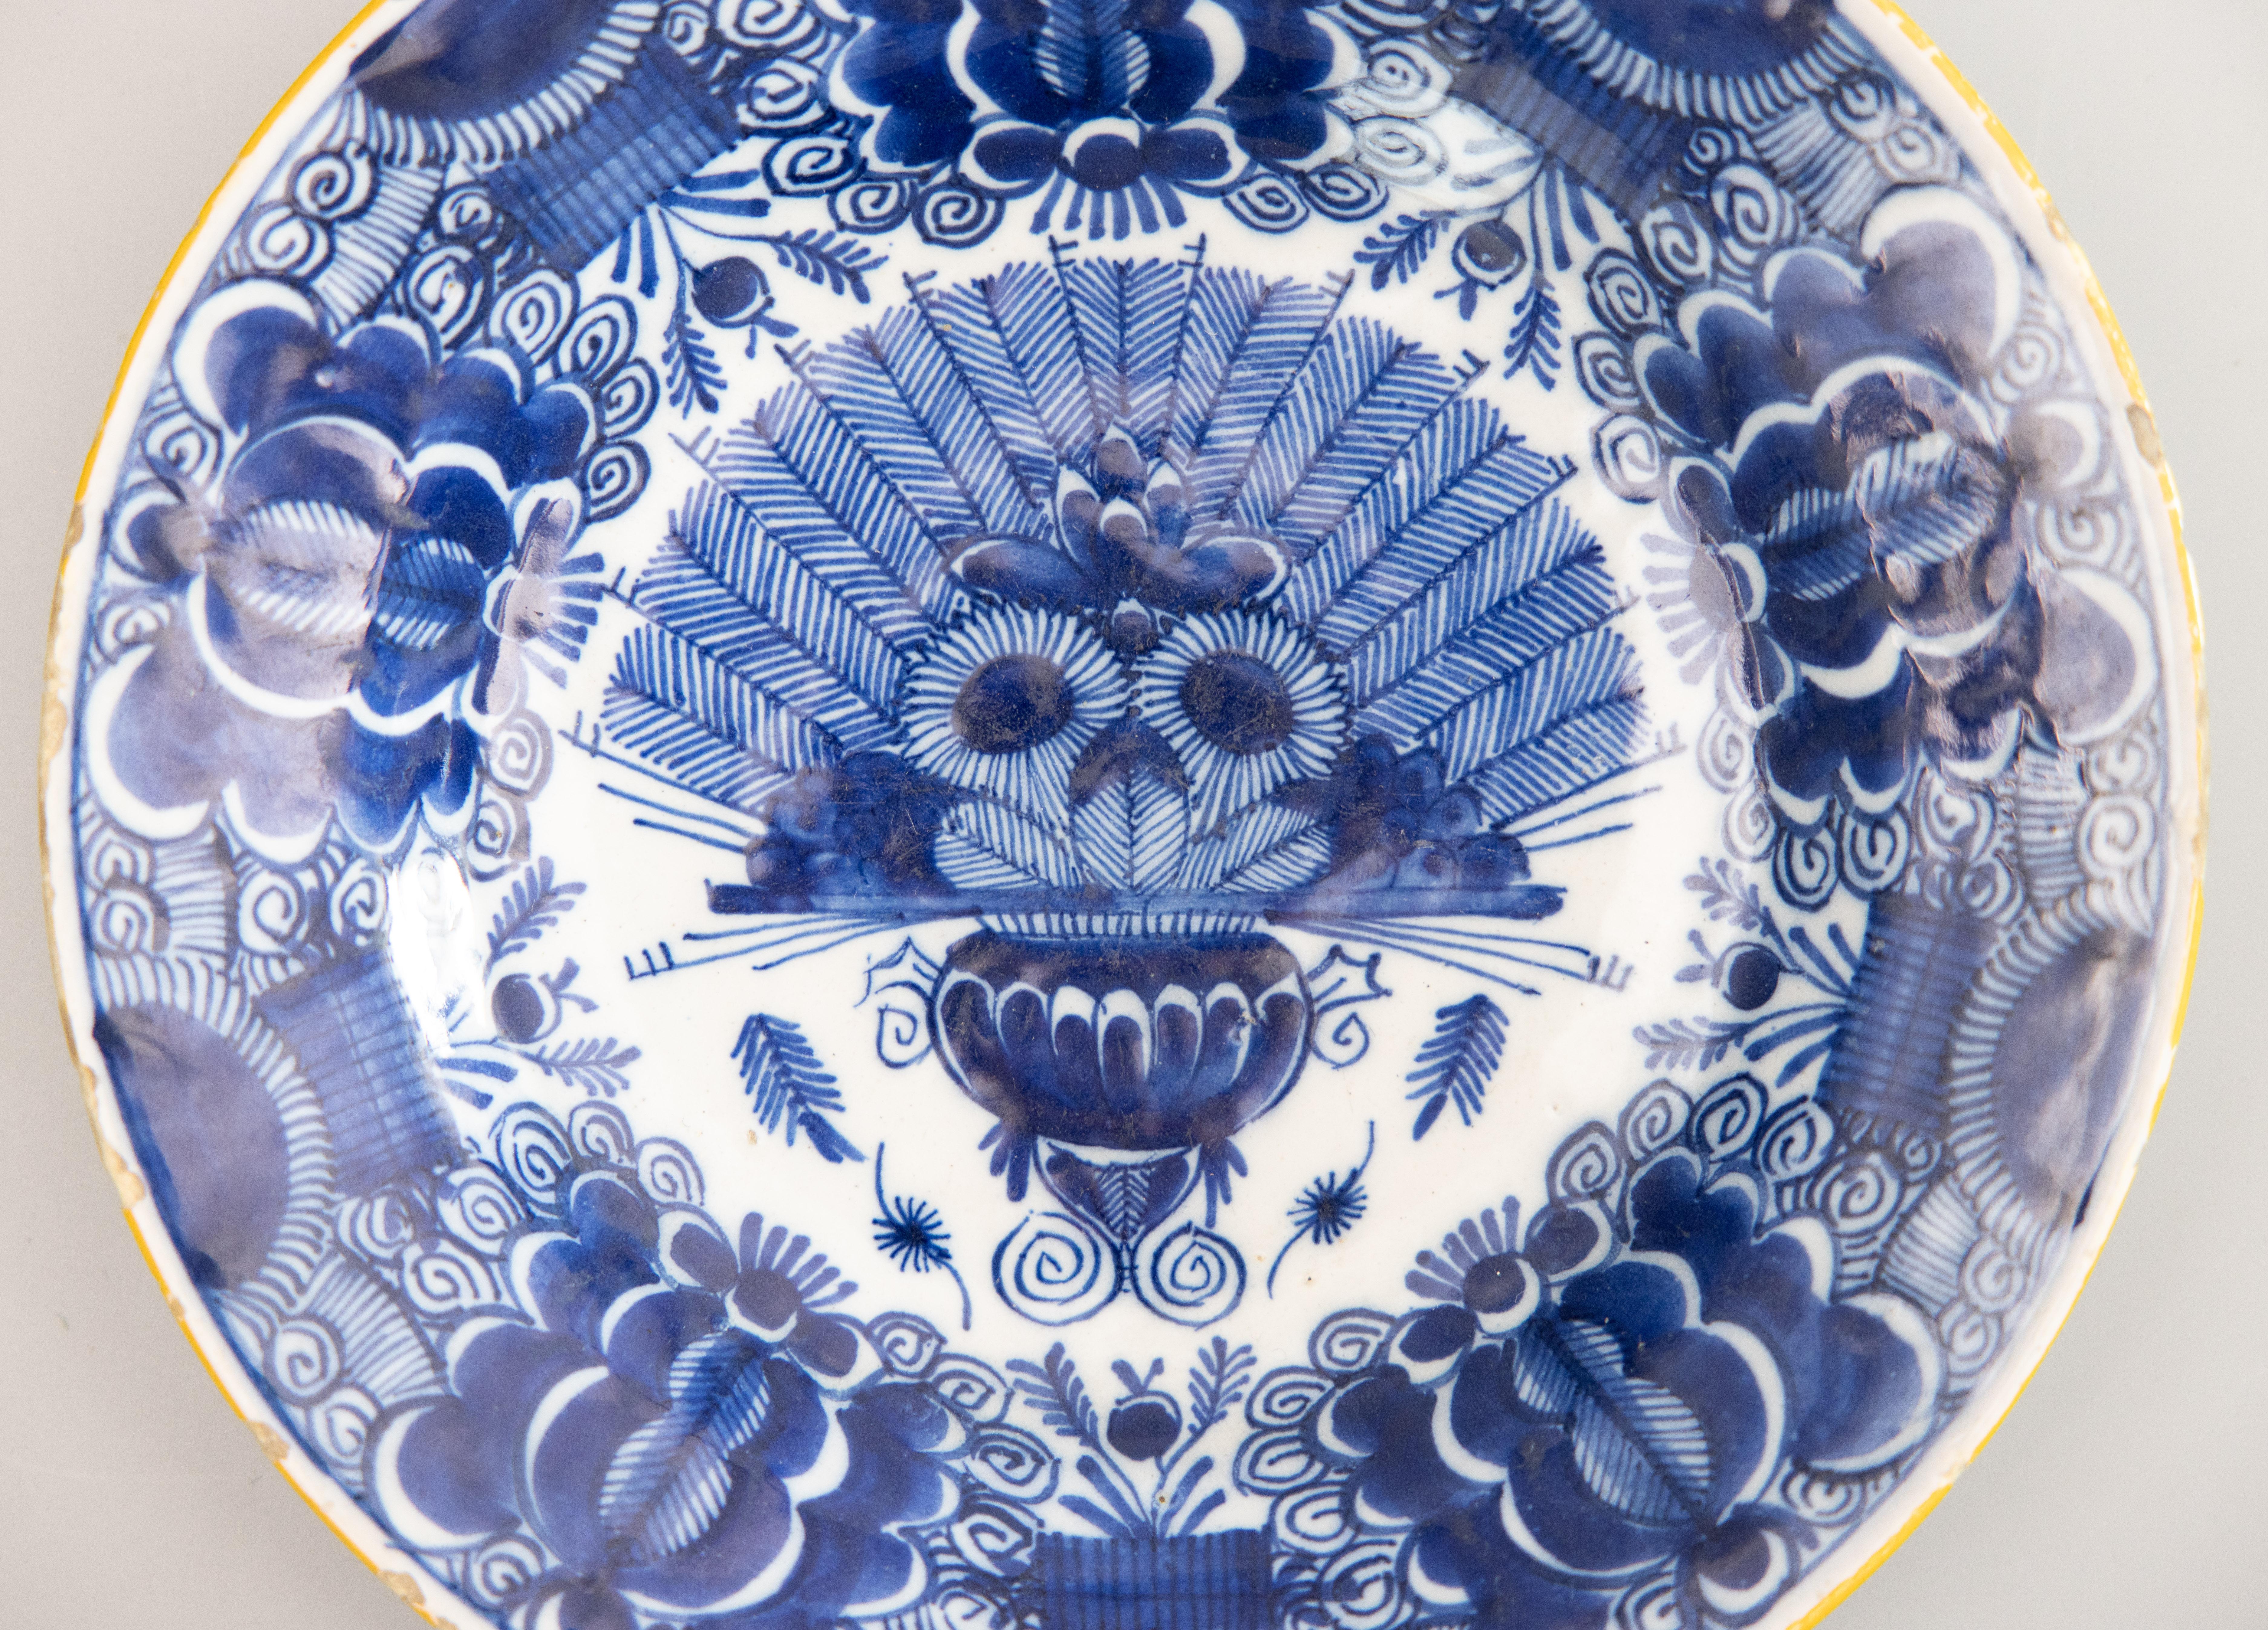 Pair of 18th Century Dutch Delft Faience Peacock Plates In Good Condition For Sale In Pearland, TX